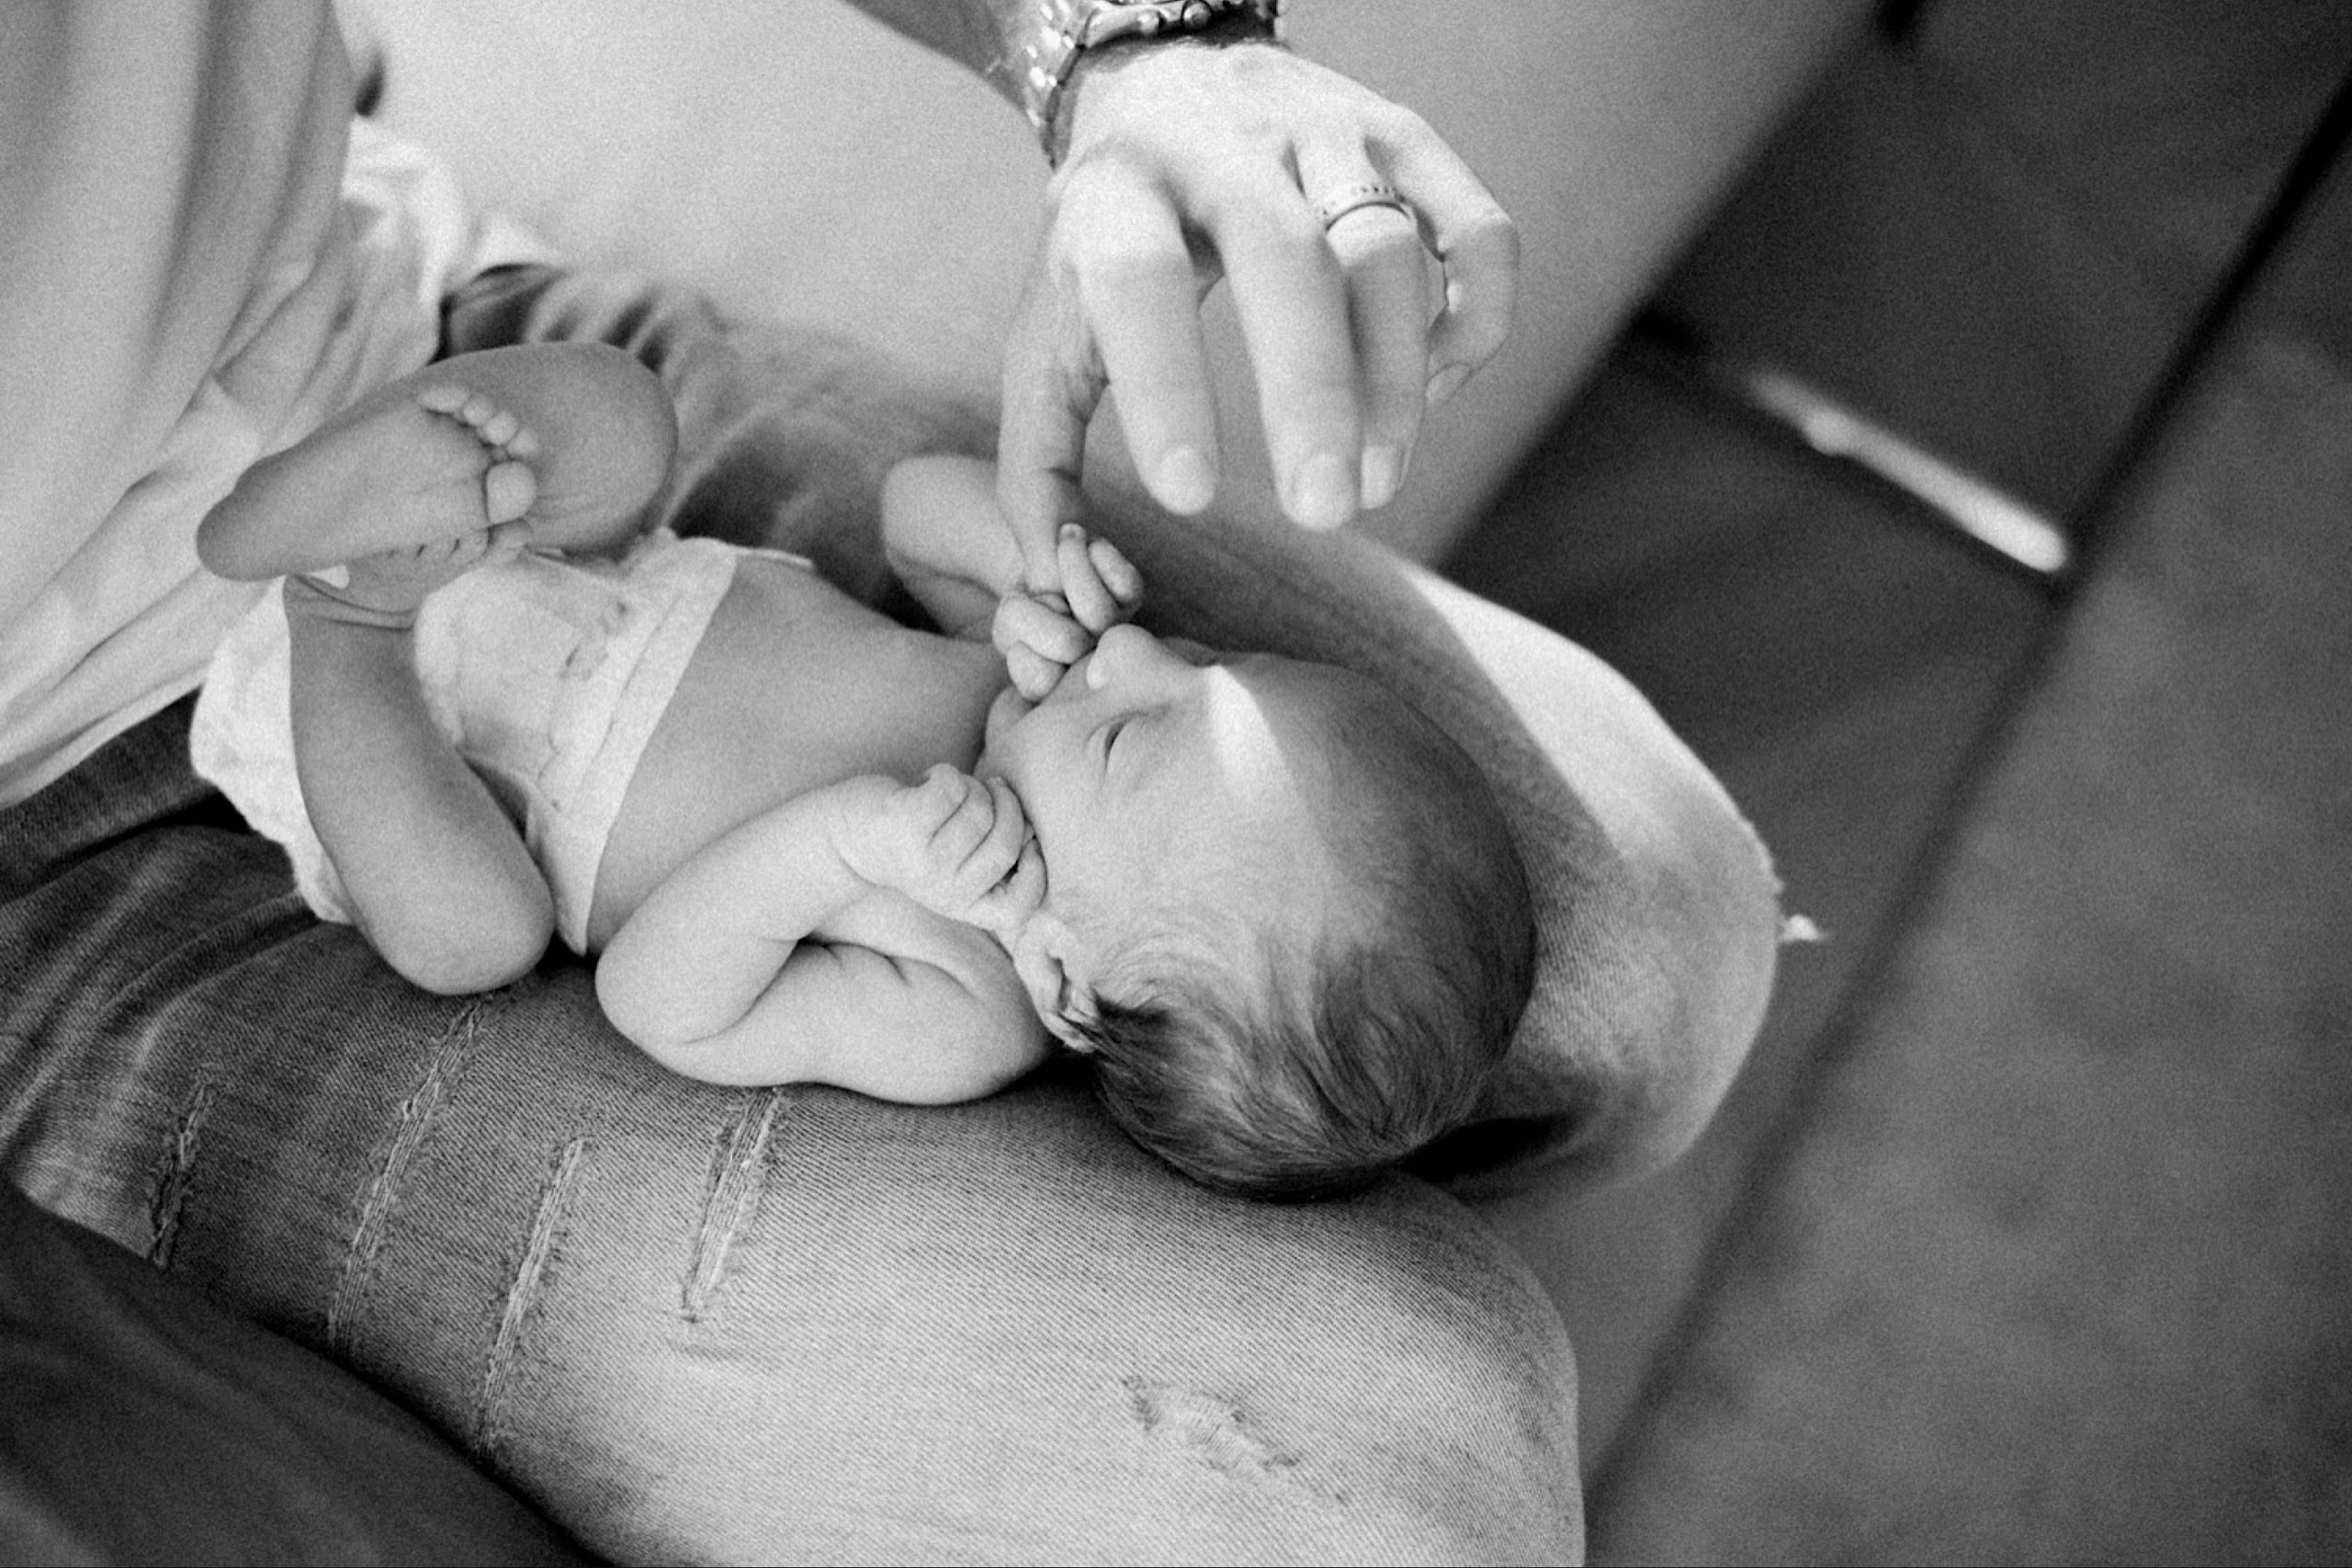 A black & white, Natural, Italy Newborn Photography of a newborn holding on to her Dad's thumb while lying on his lap.